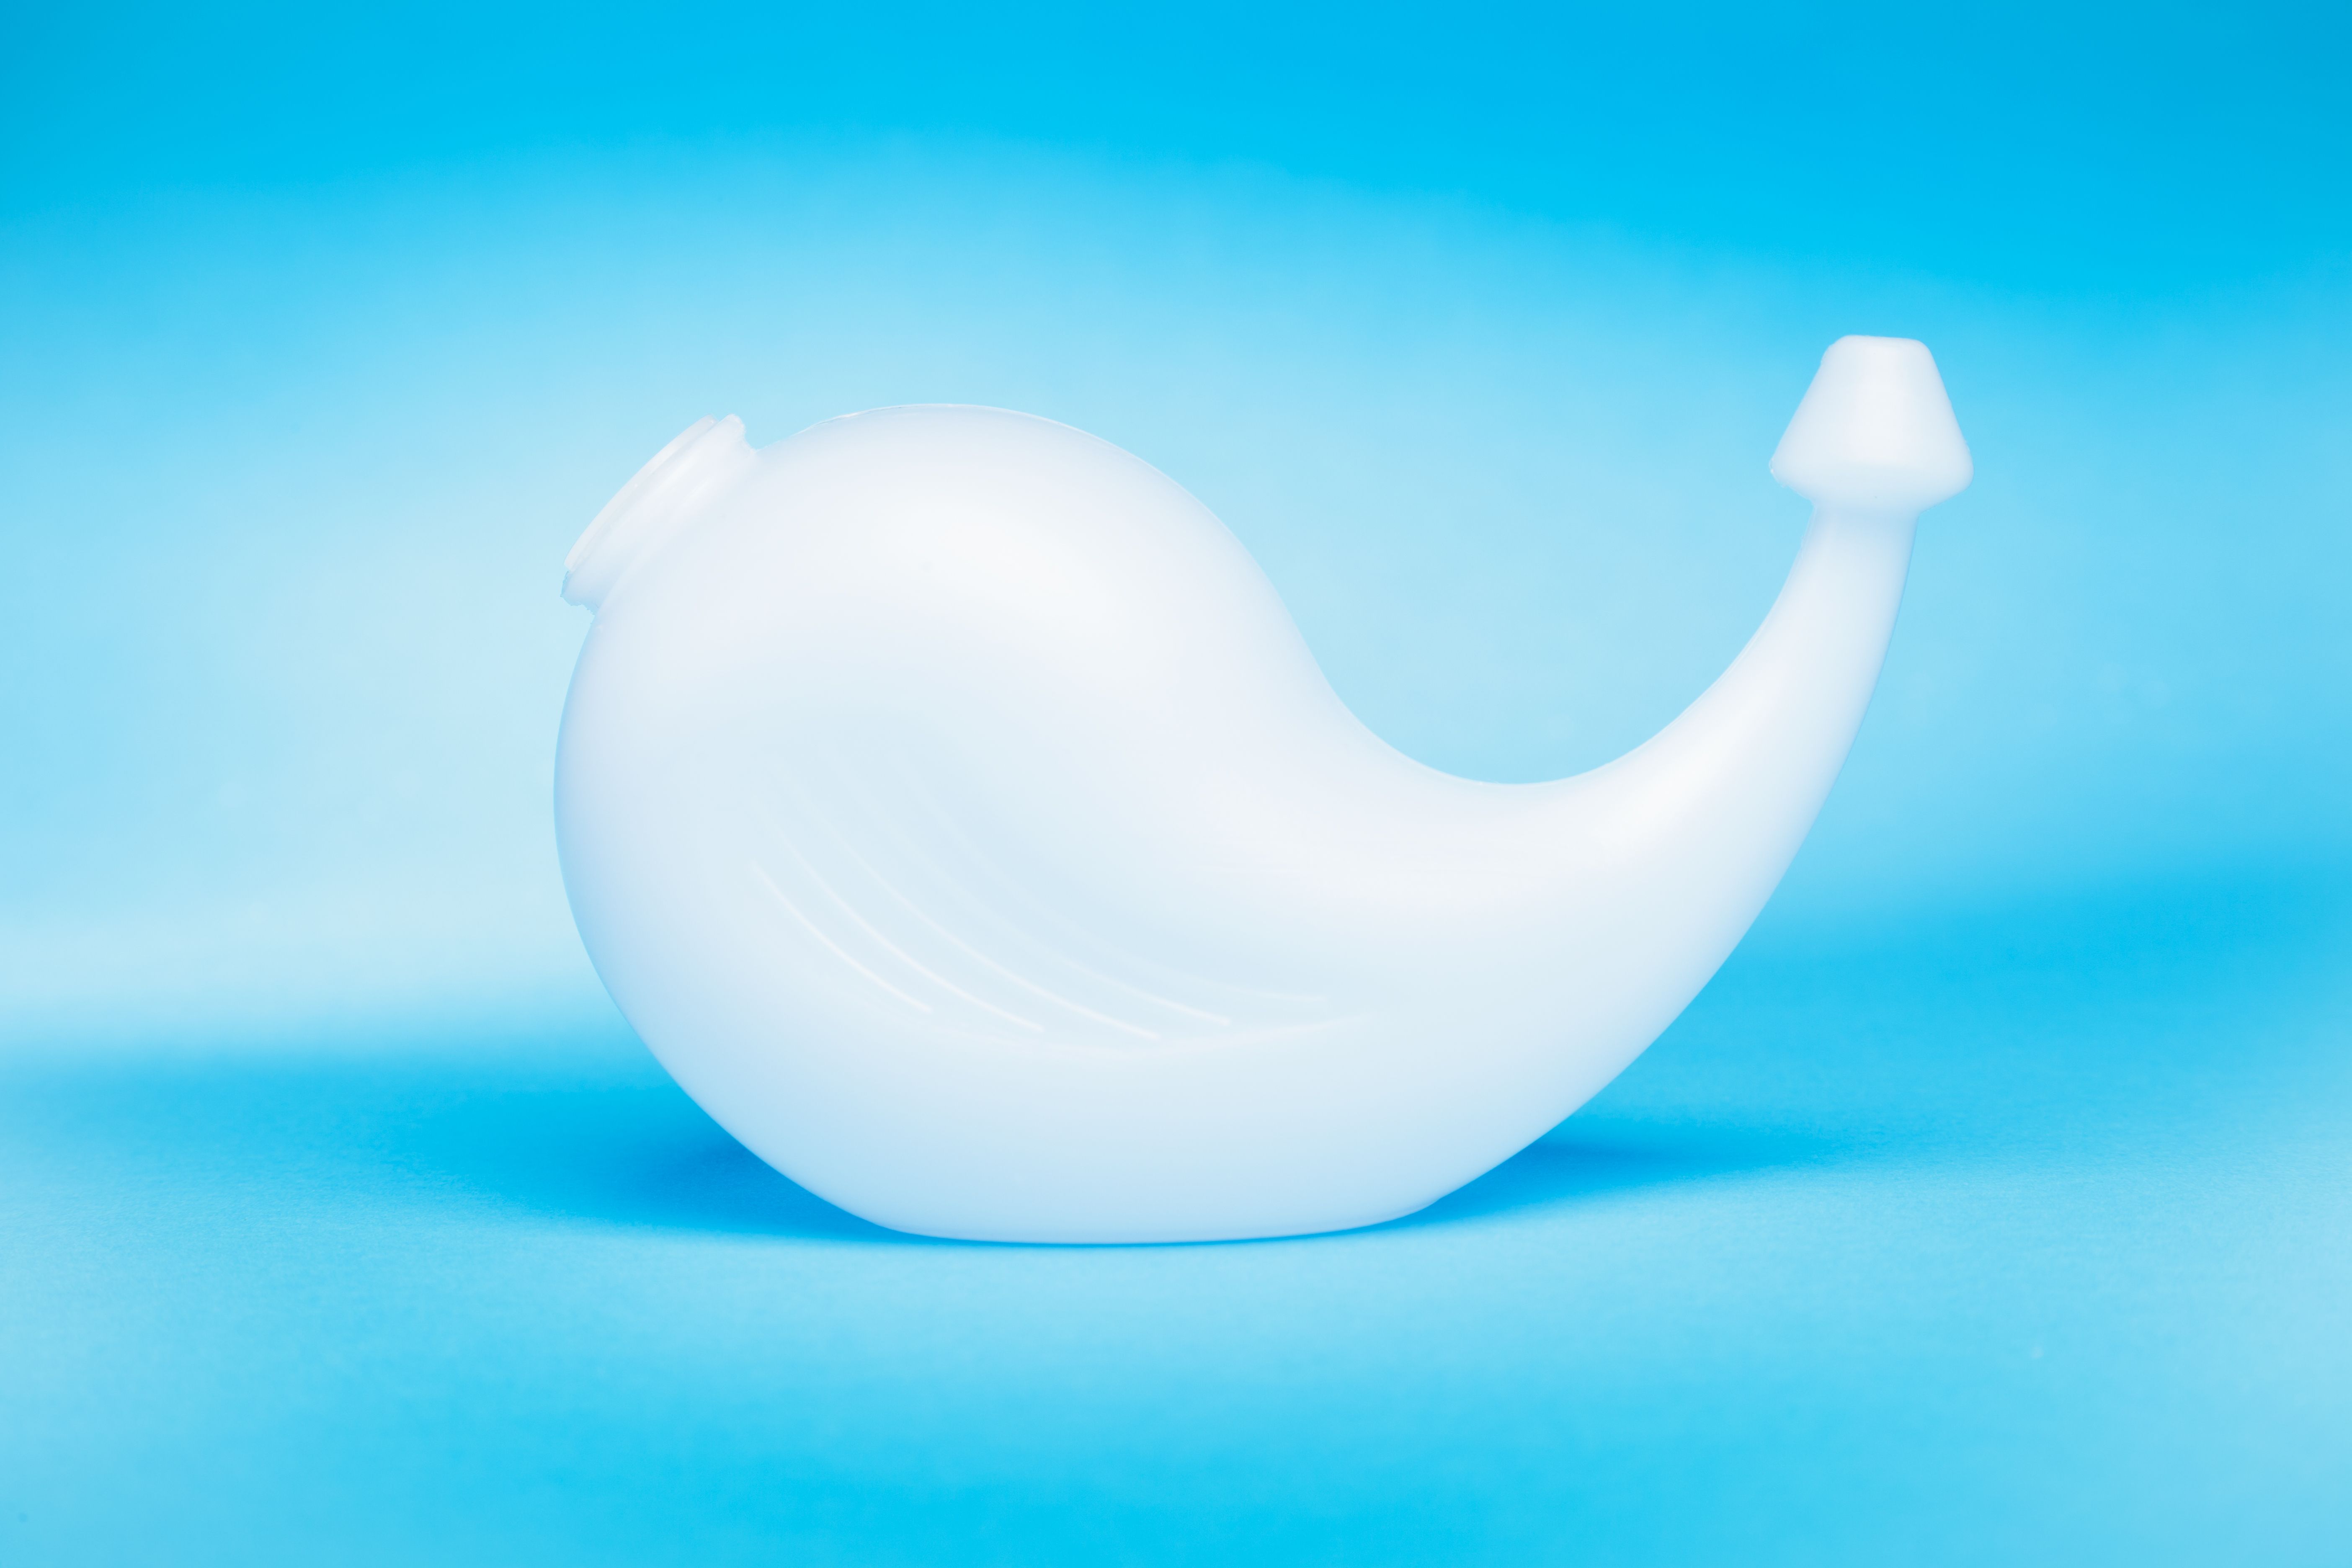 Do Neti Pots Work? Here's How to Use Them Safely